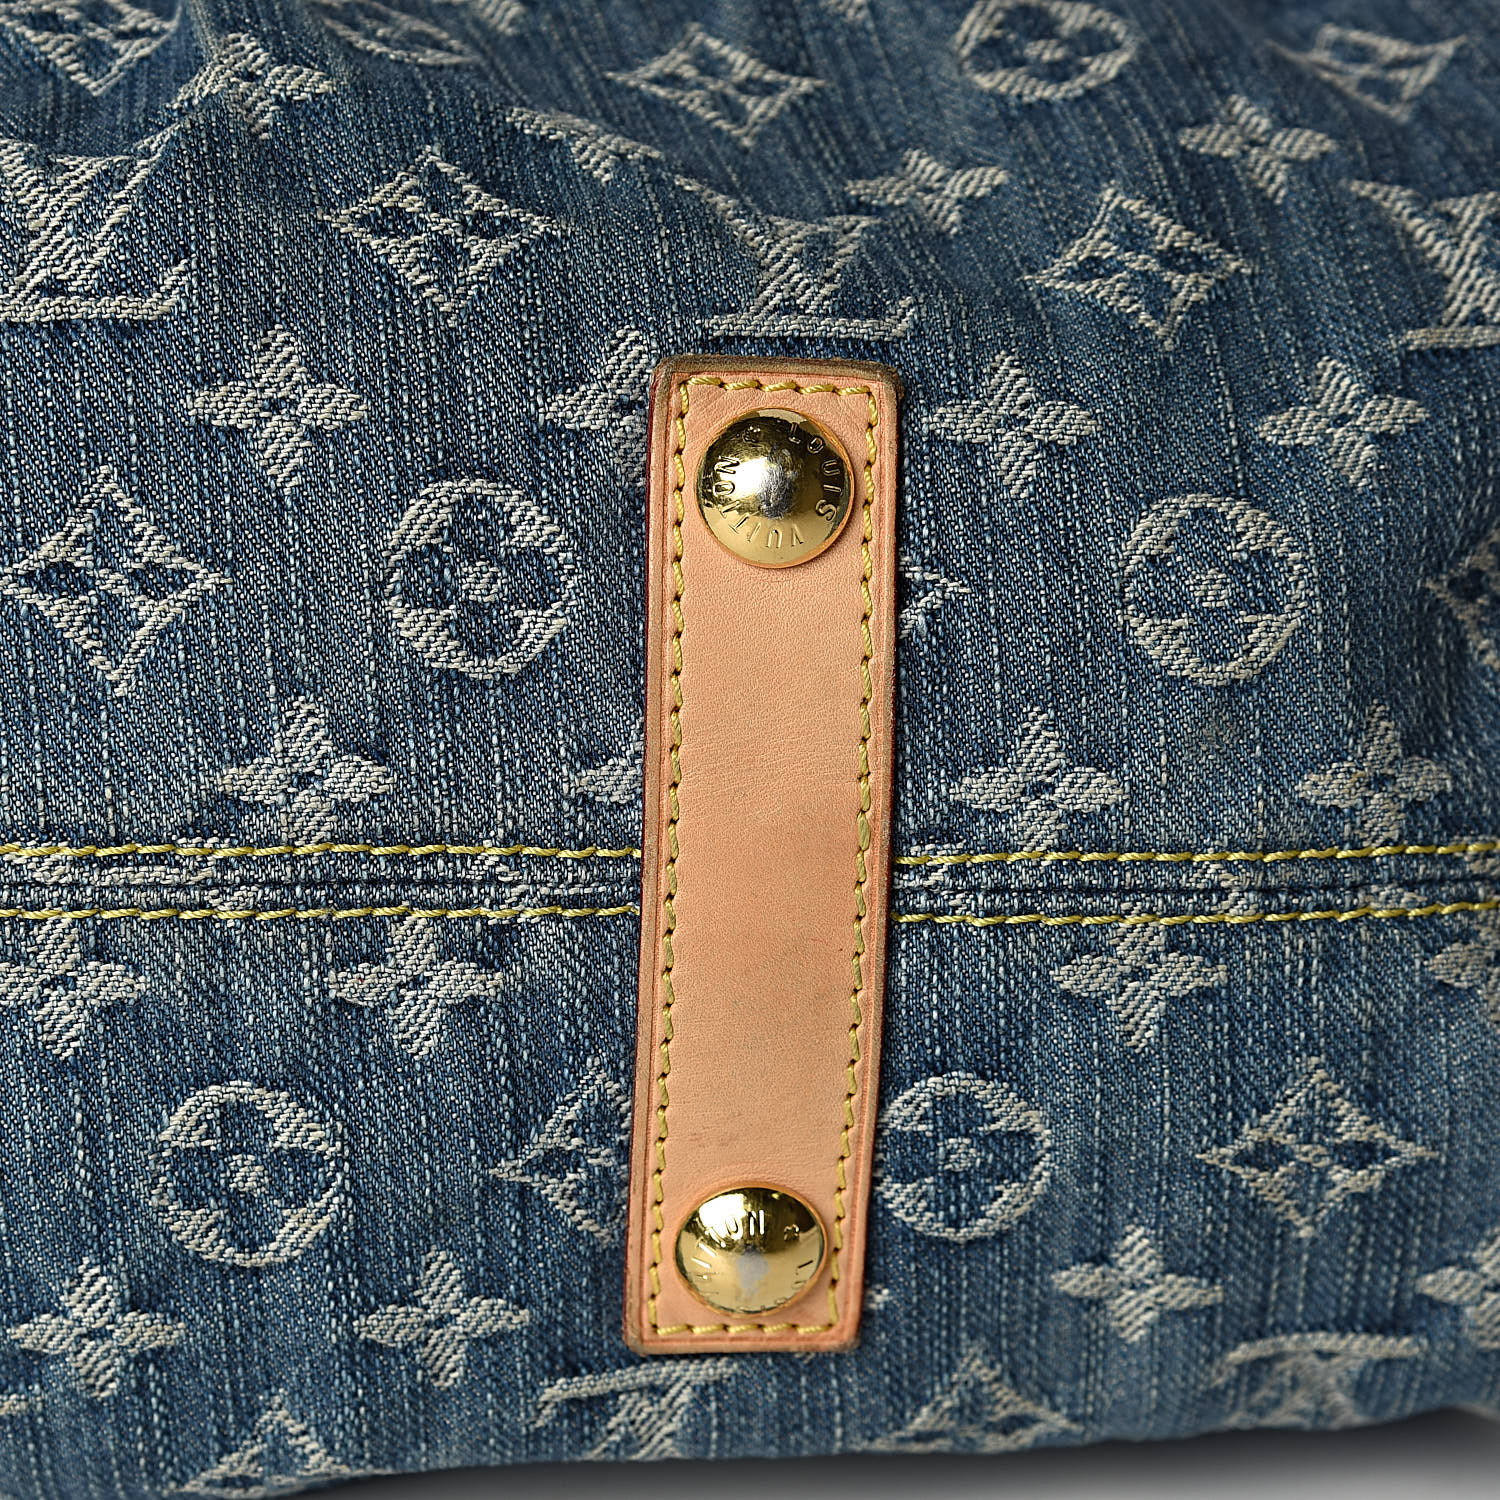 Blue Louis Vuitton Bag - 238 For Sale on 1stDibs